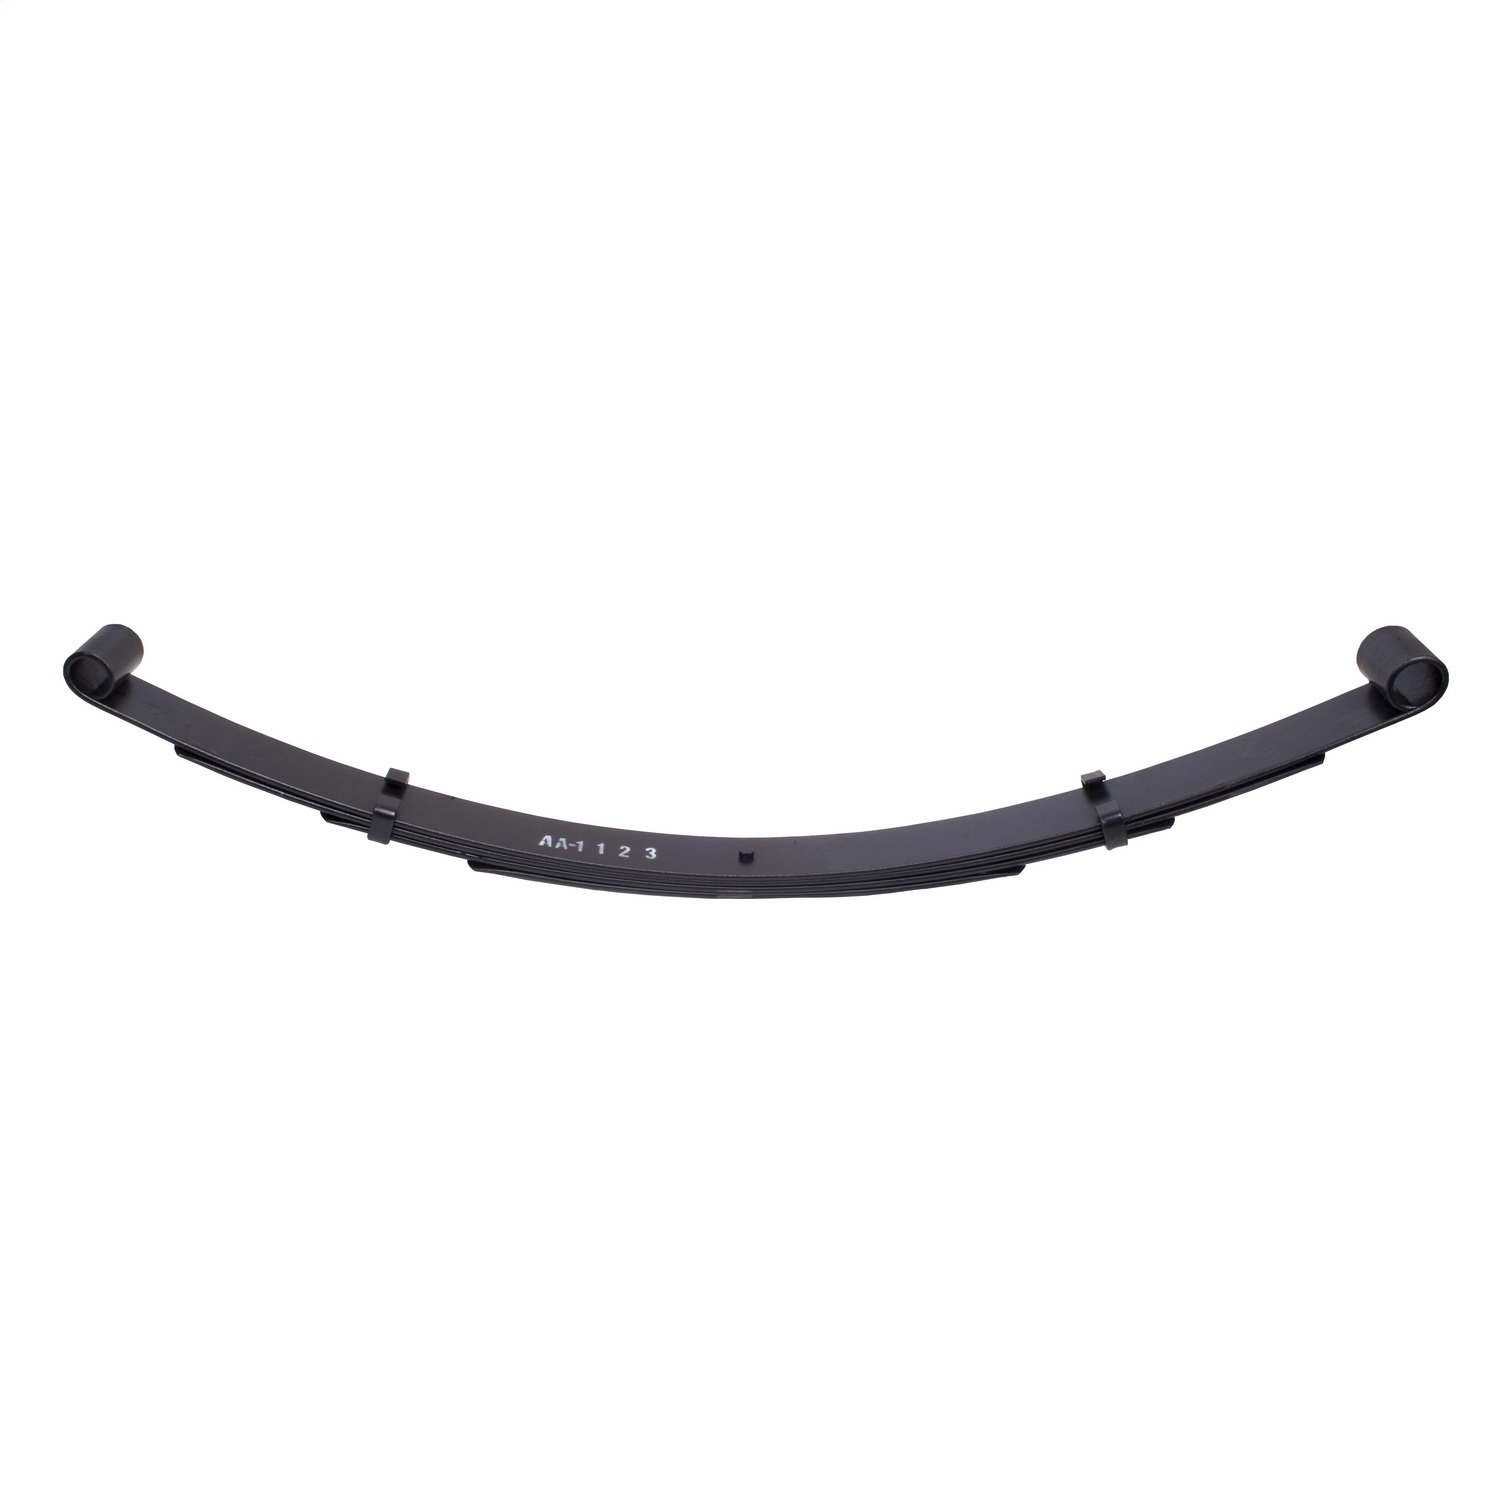 Stock replacement 6 leaf front spring from Omix-ADA, Fits 76-86 Jeep CJ7 and 81-86 CJ8 Left or right side.